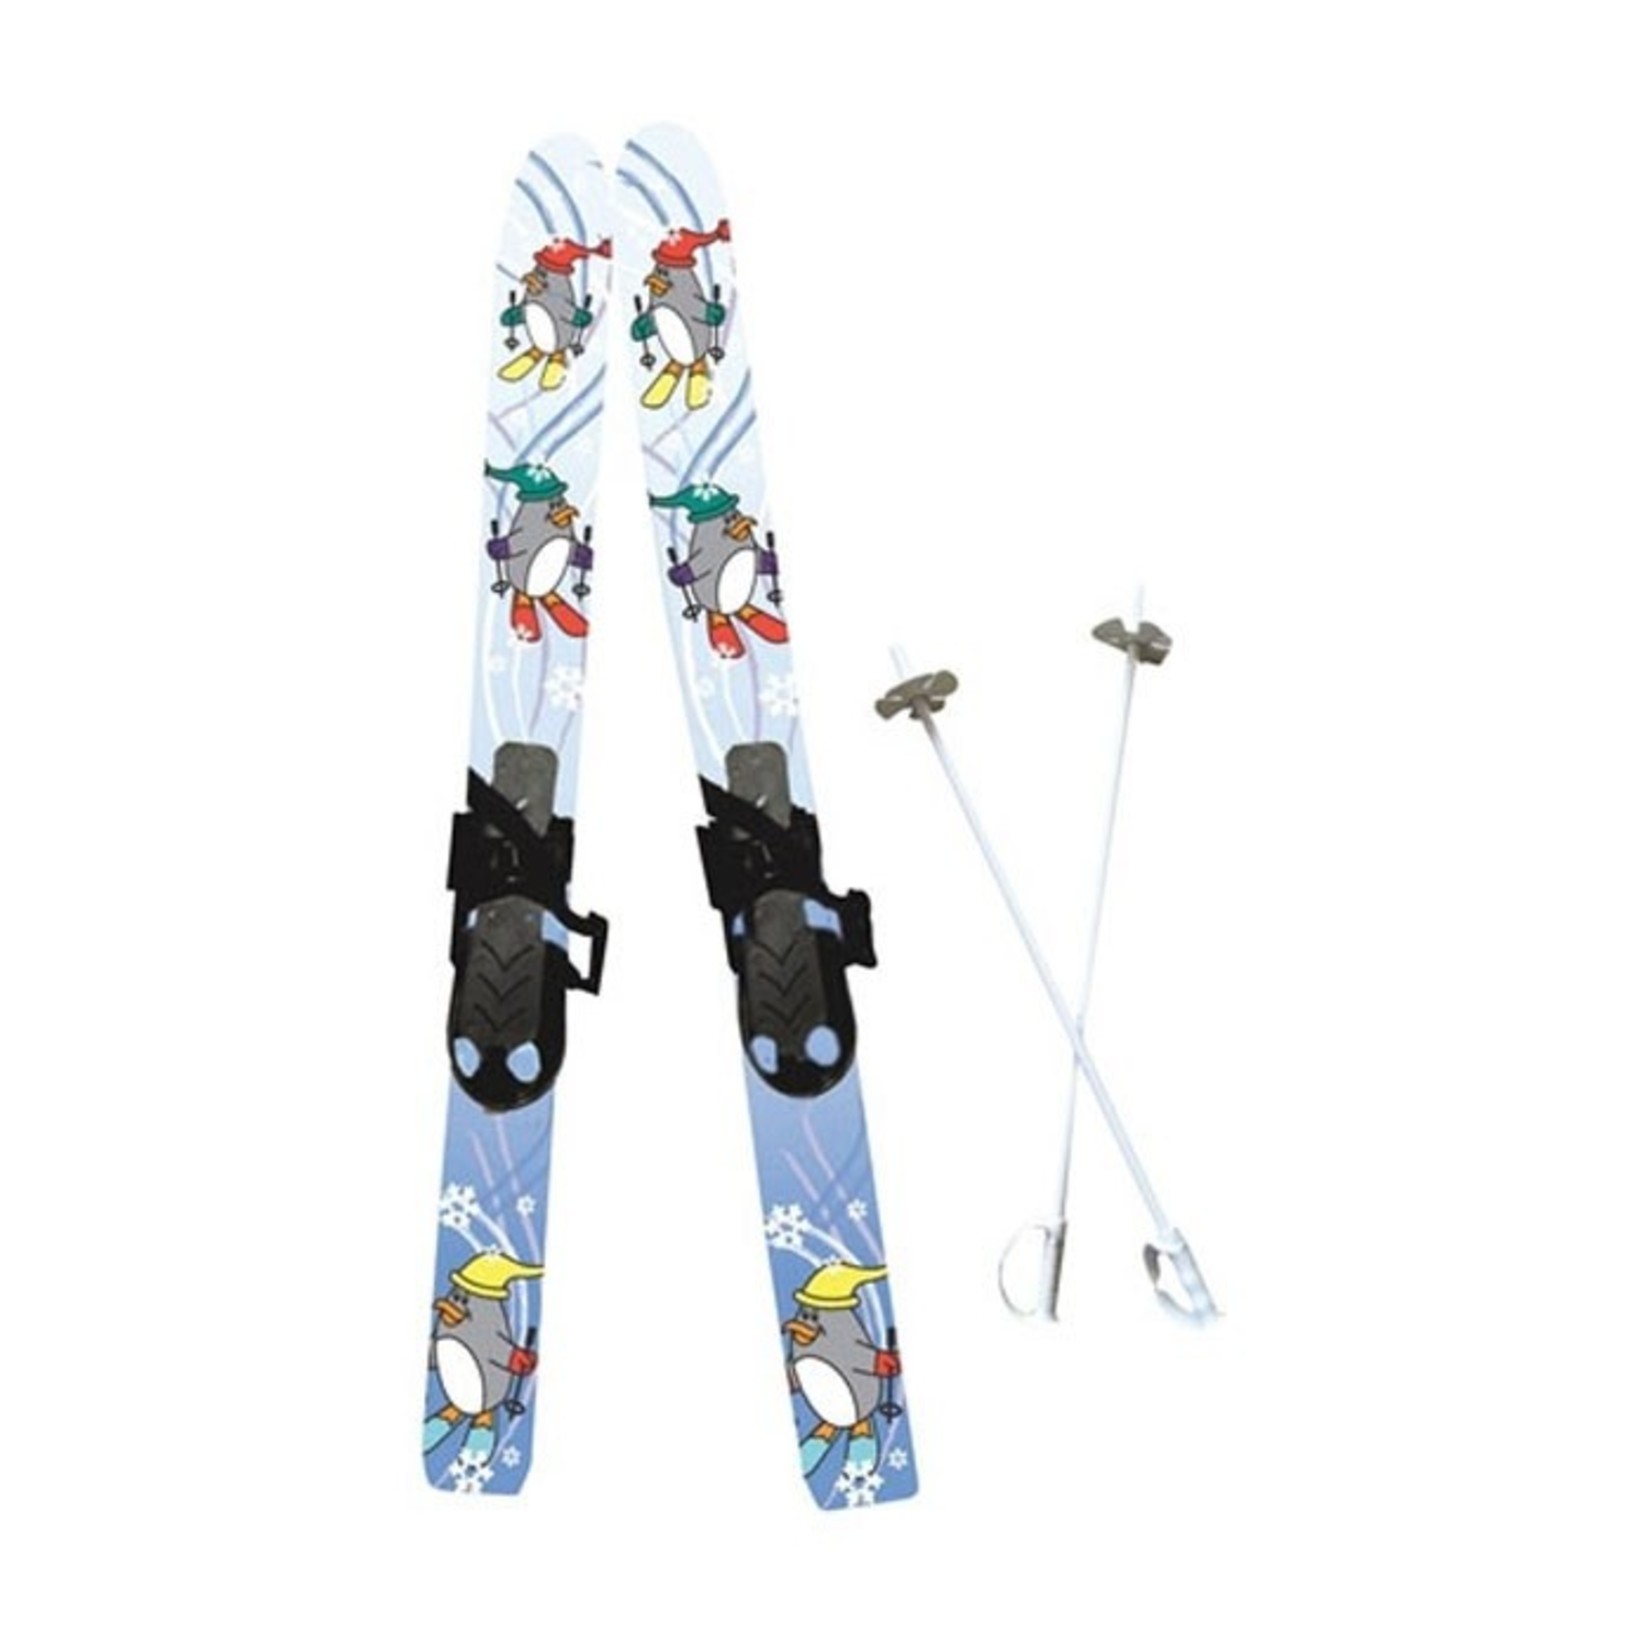 Sports Accessories Of America Lil' Racer Chaser Ski Set